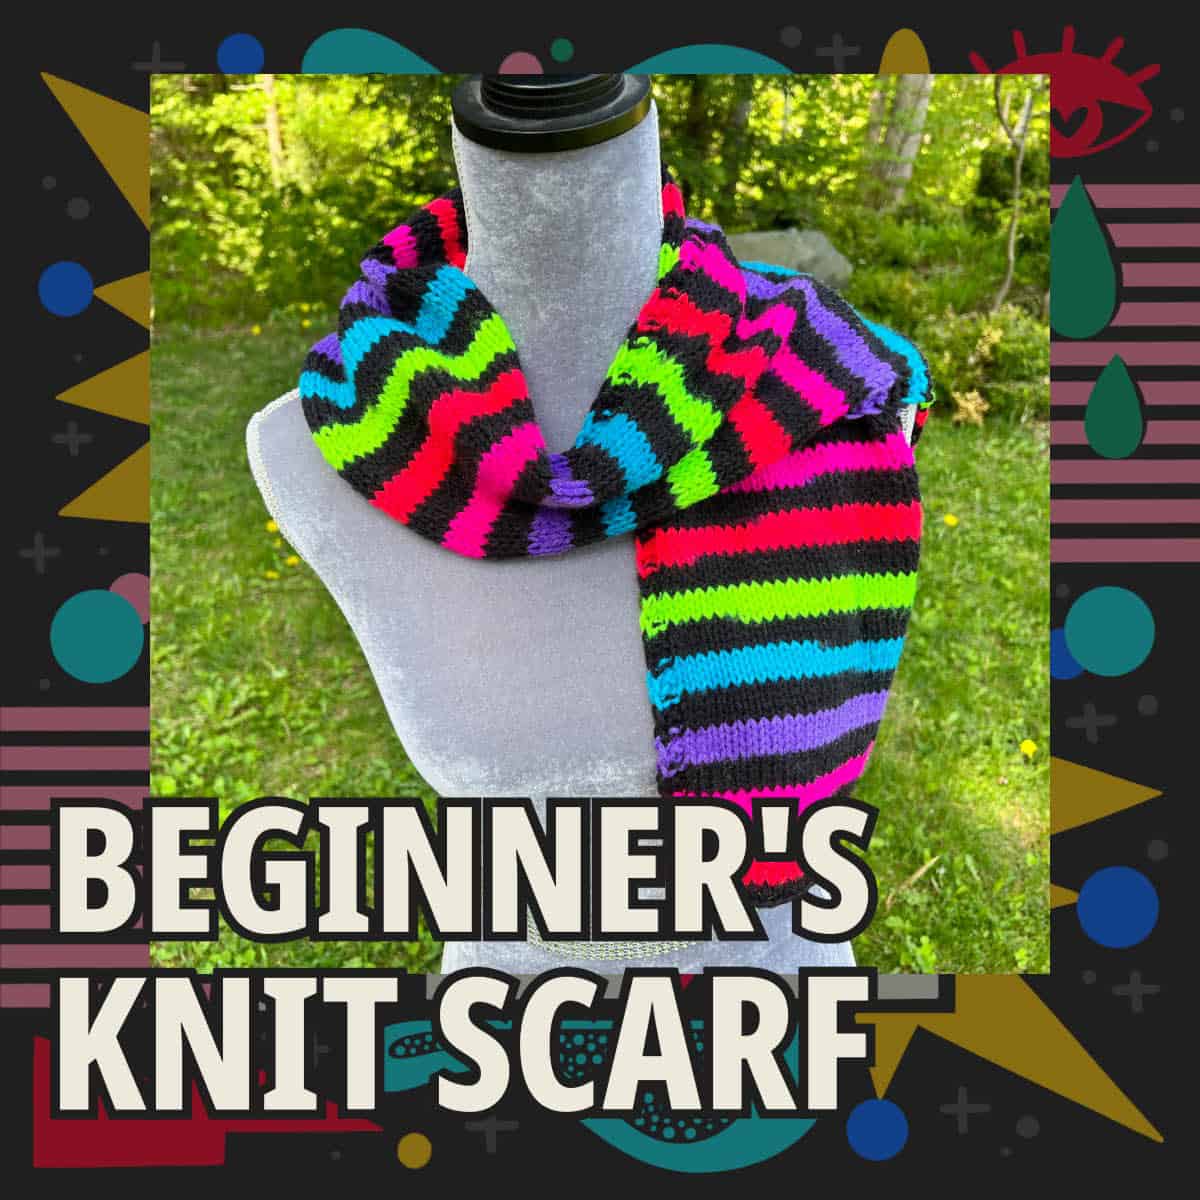 Beginner's Knit Scarf Pattern by Mikey